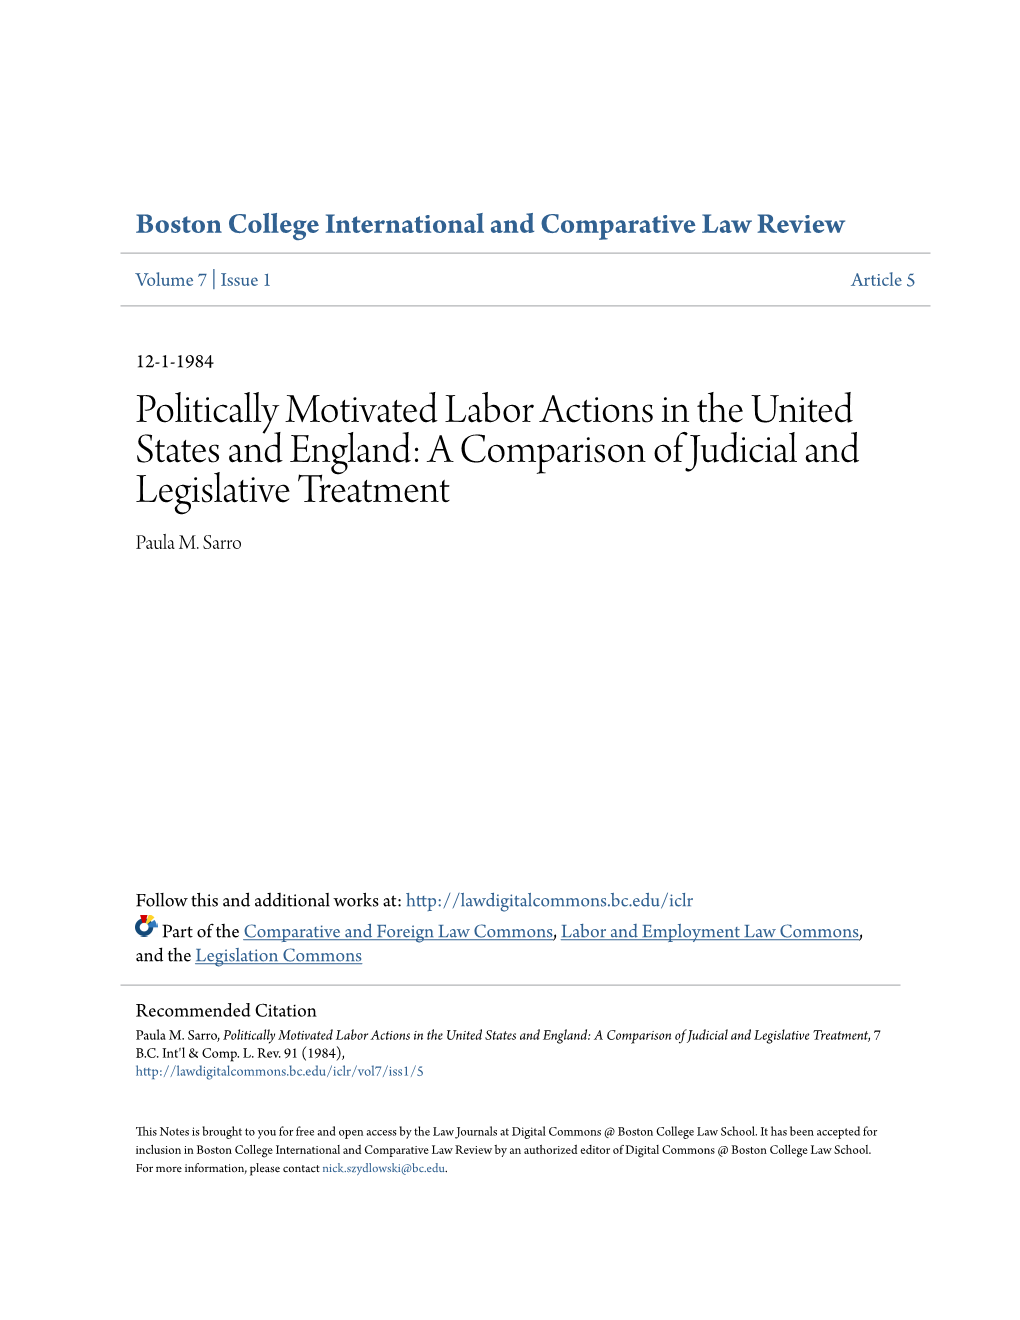 Politically Motivated Labor Actions in the United States and England: a Comparison of Judicial and Legislative Treatment Paula M